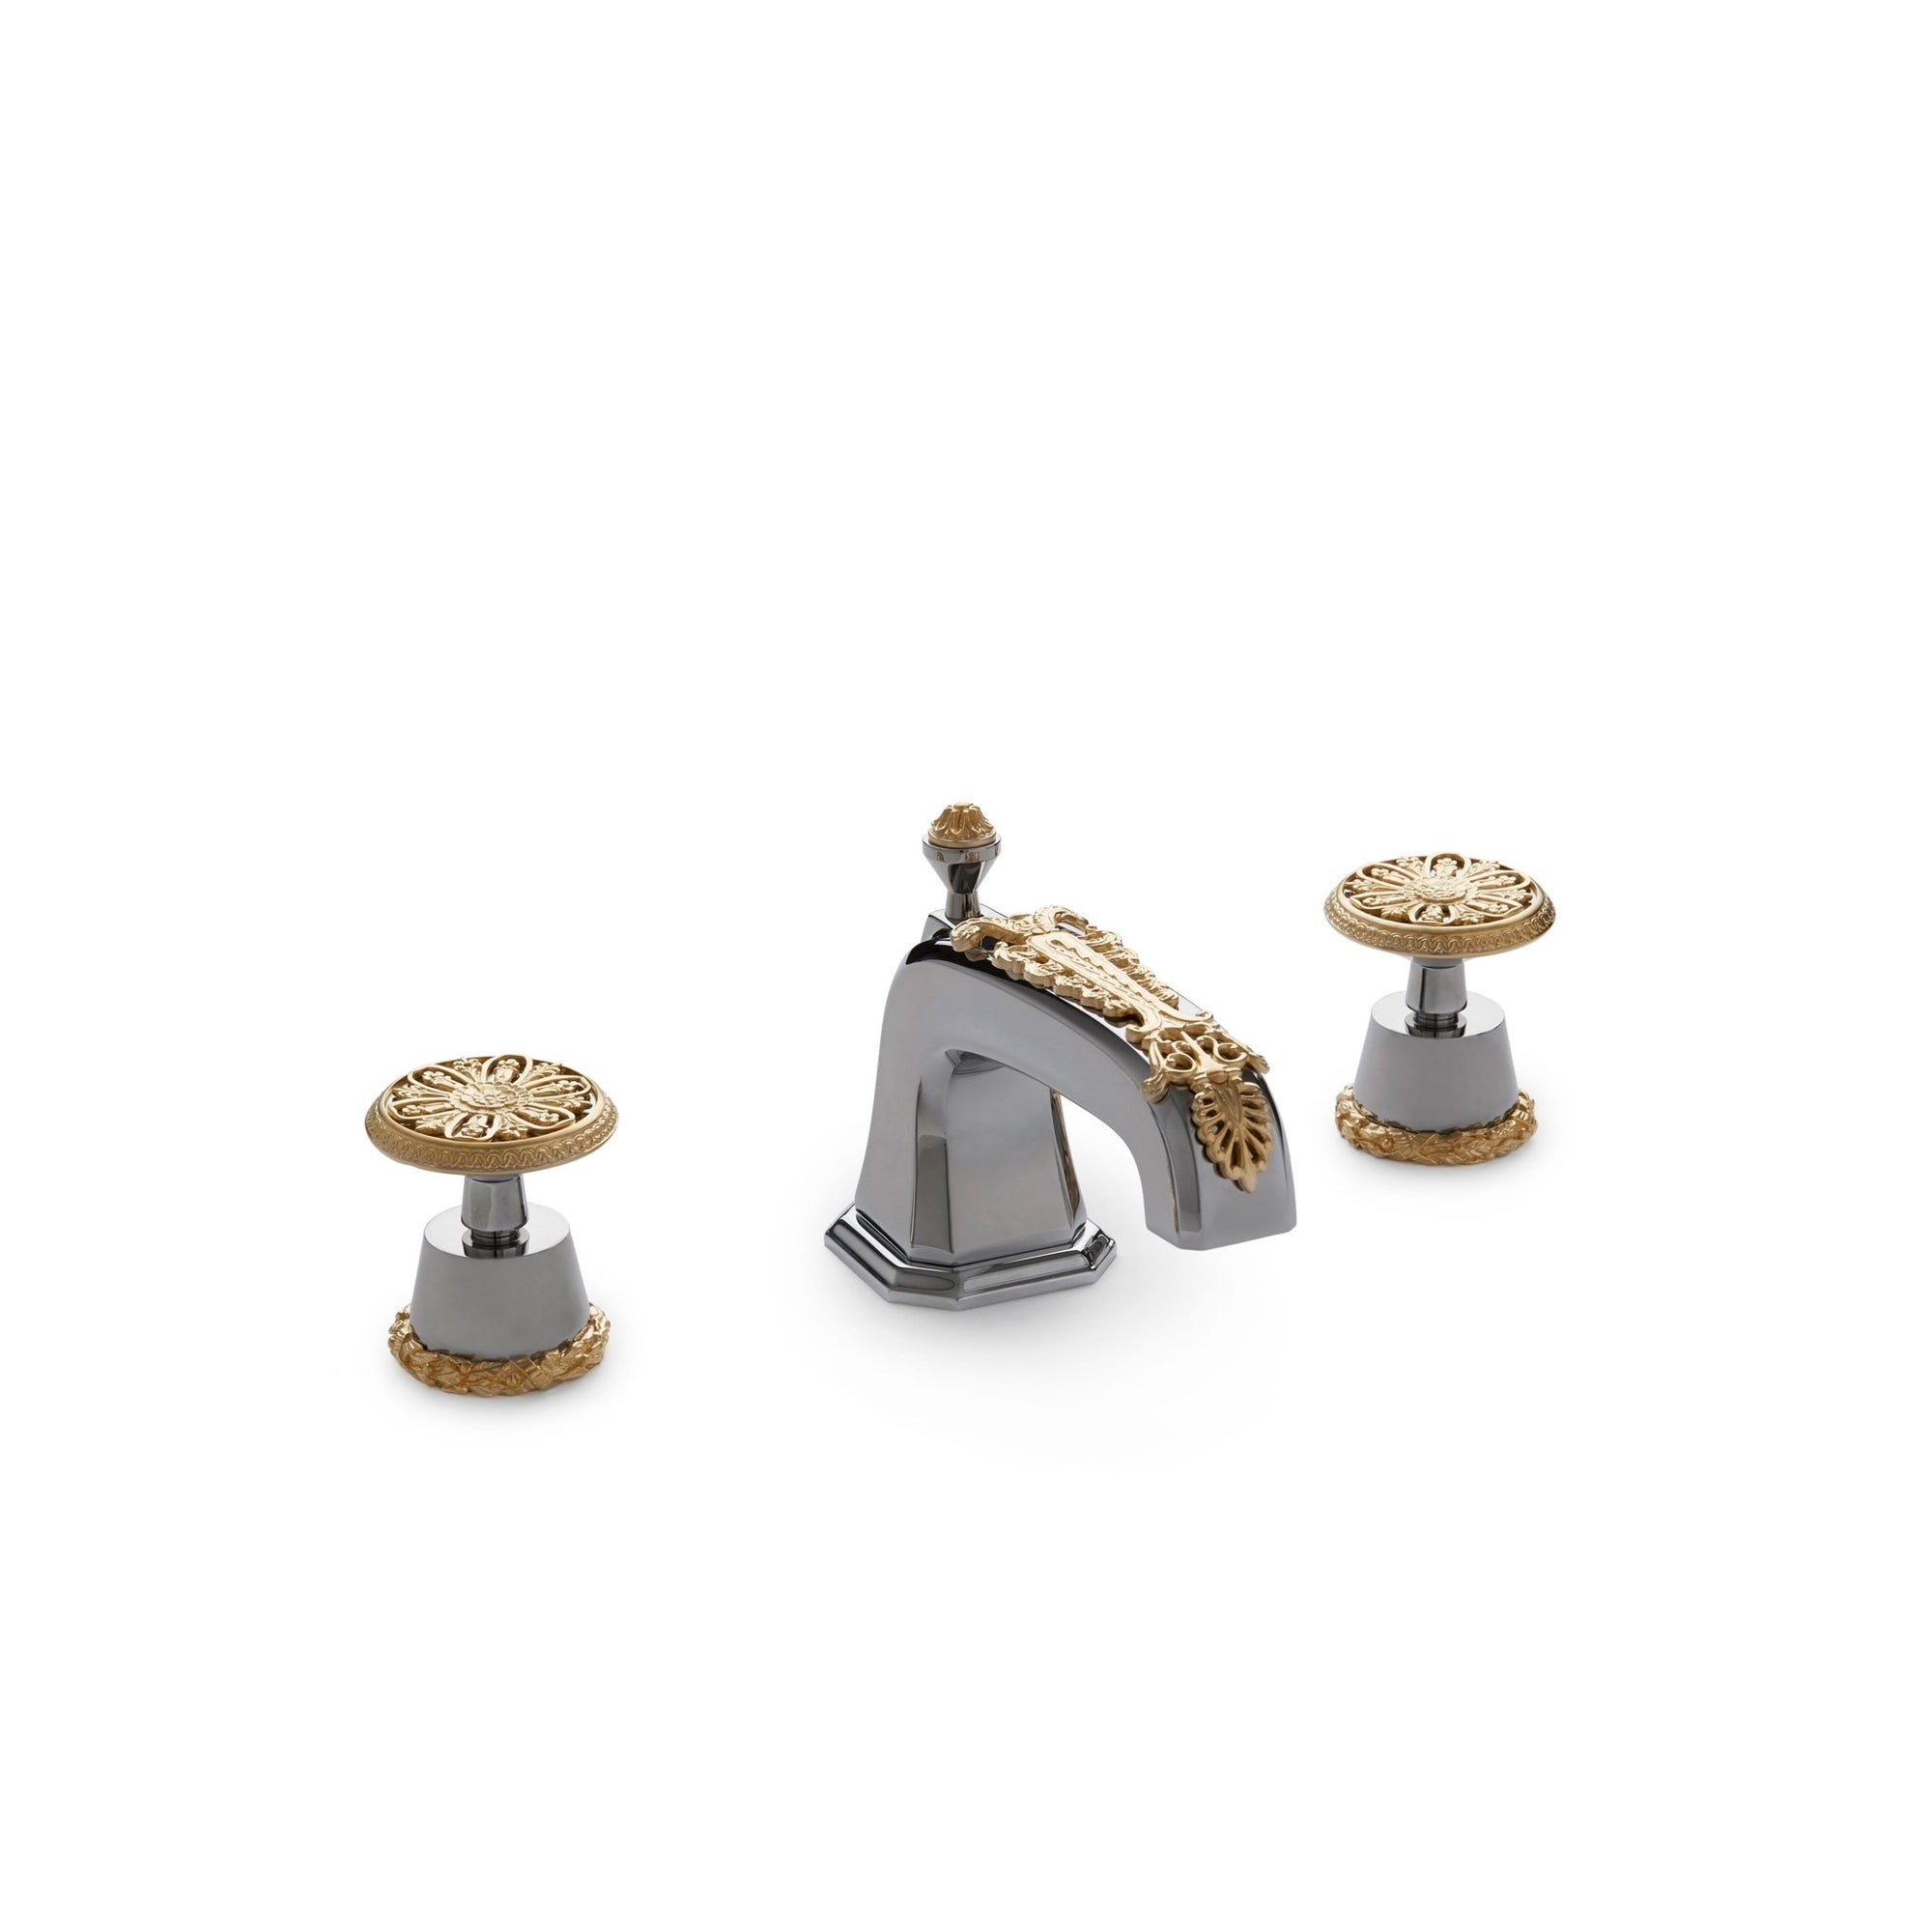 0916BSN-CP-GP Sherle Wagner International Filigree Knob Faucet Set in Polished Chrome and Gold Plate metal finish